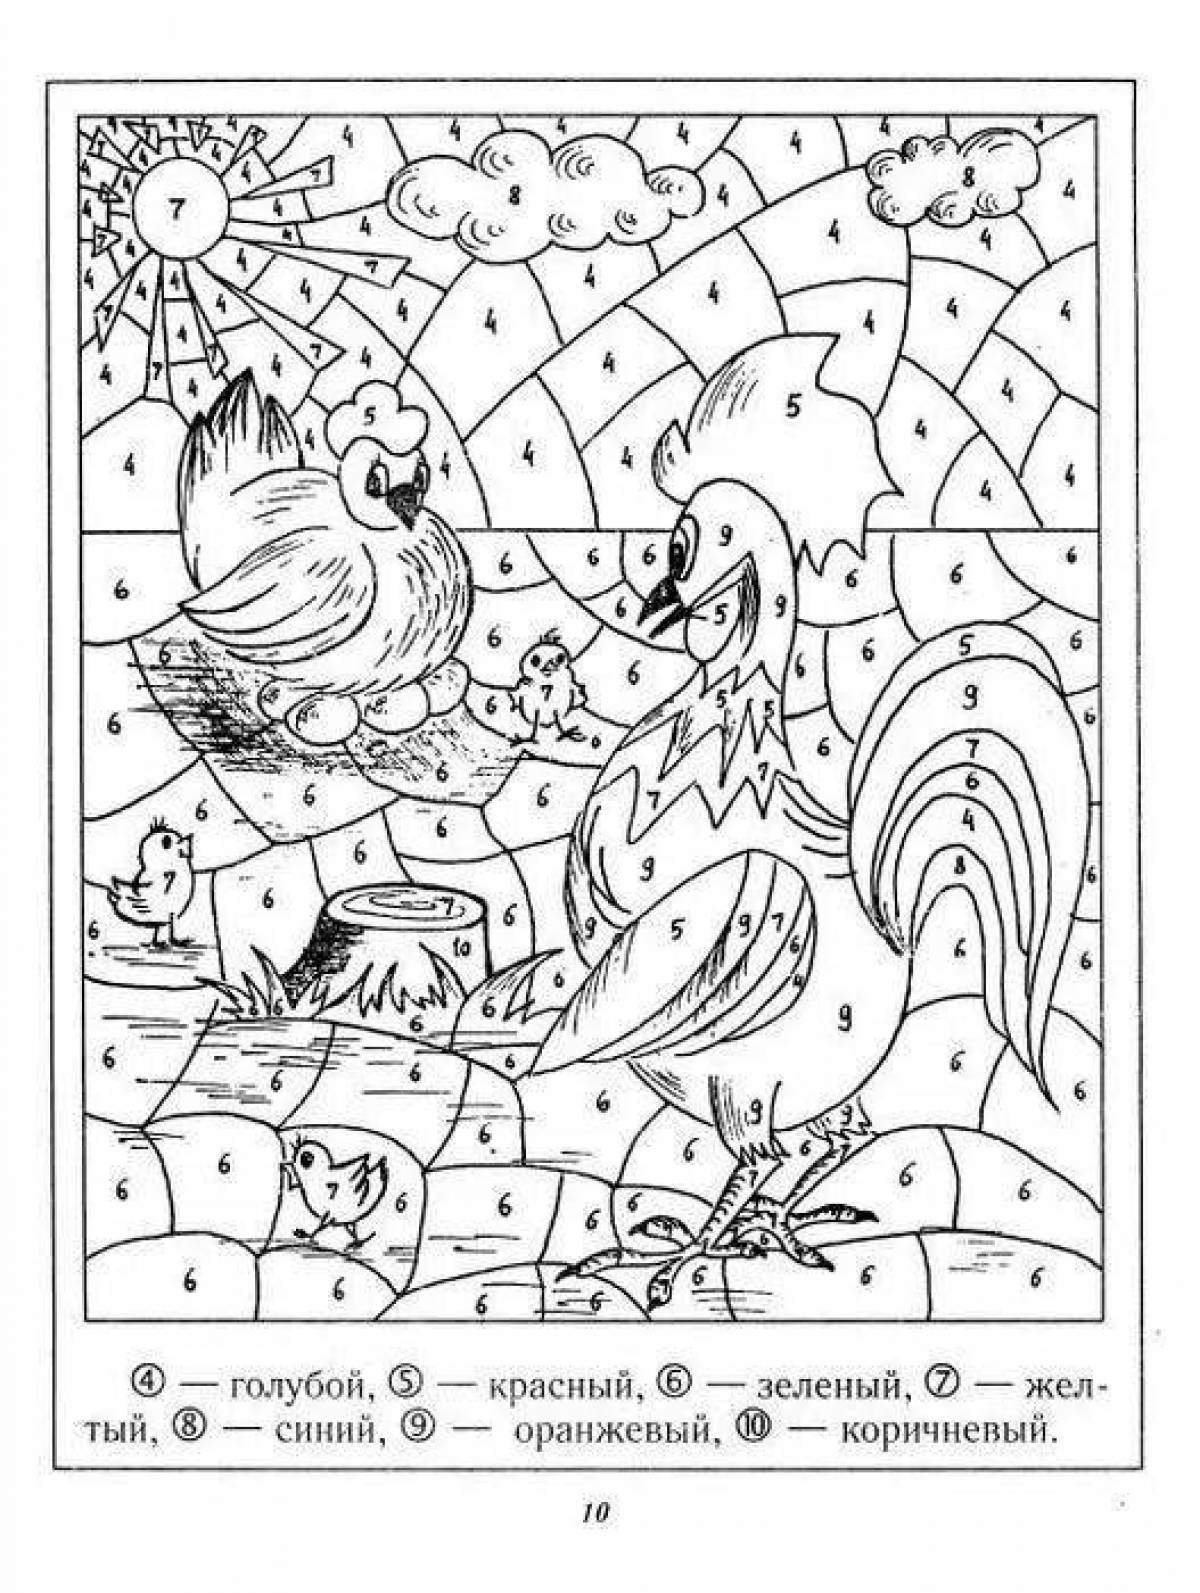 Fun coloring by numbers for kids 6 7